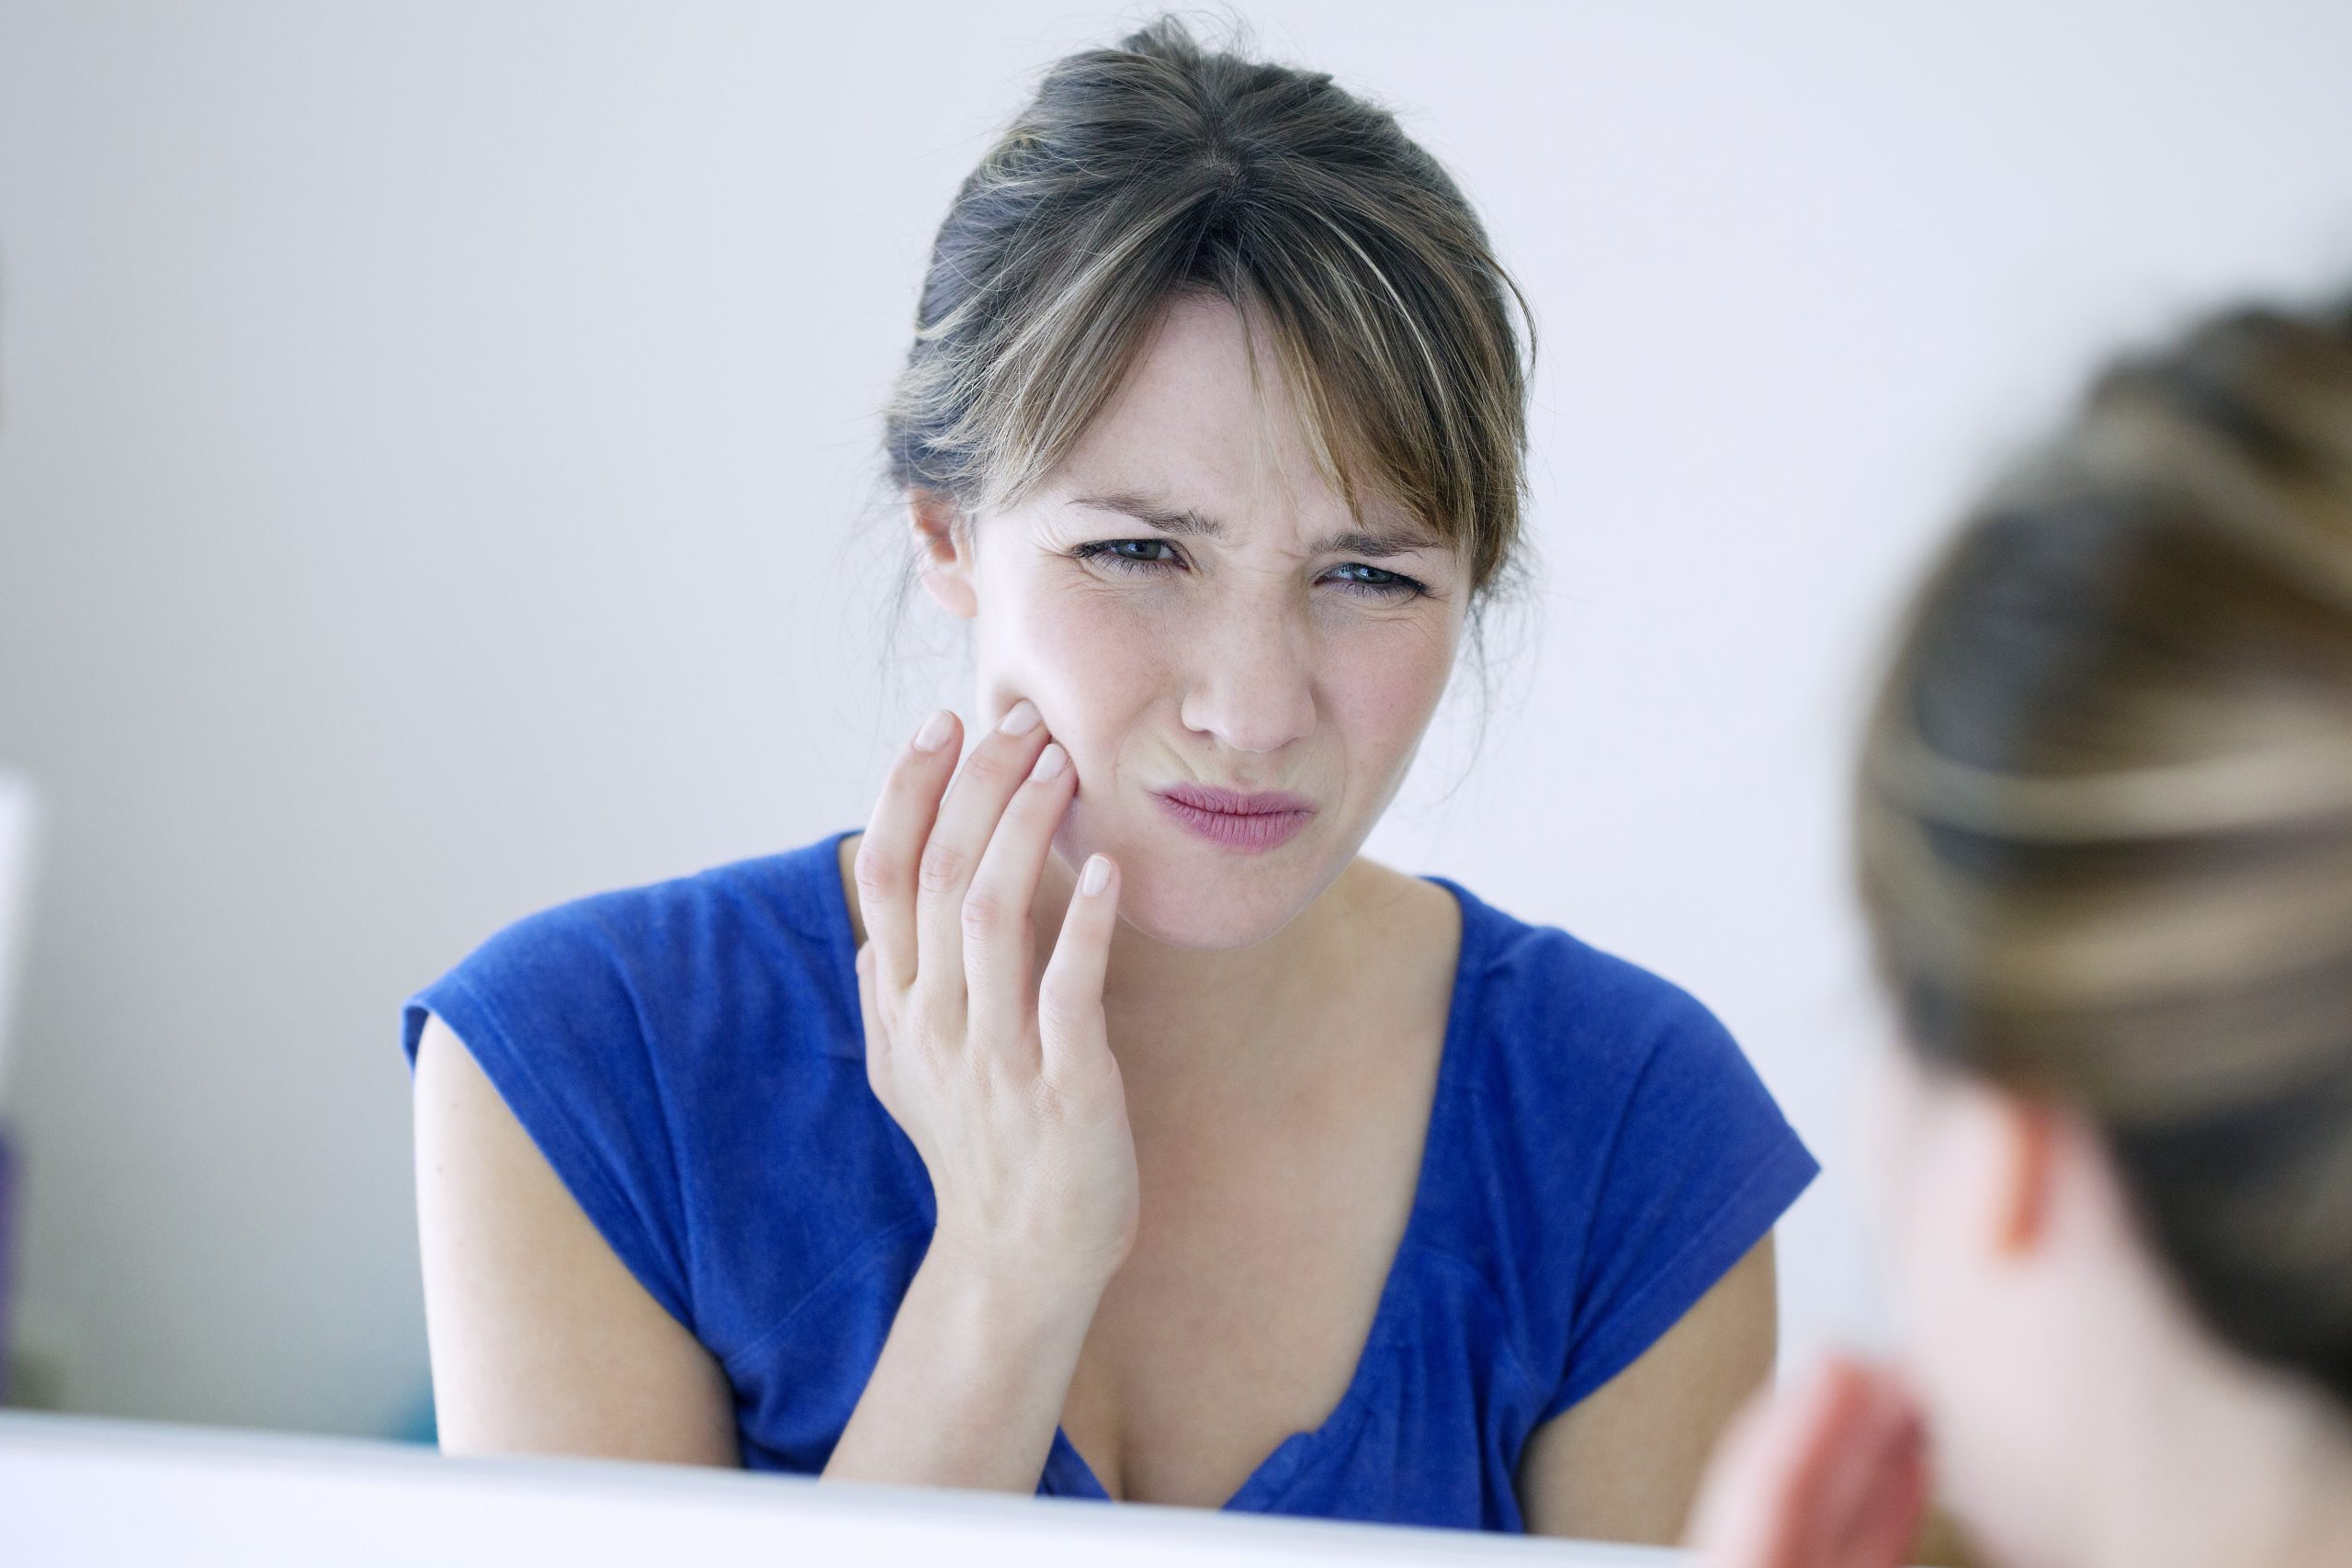 What can a toothache be indicative of?